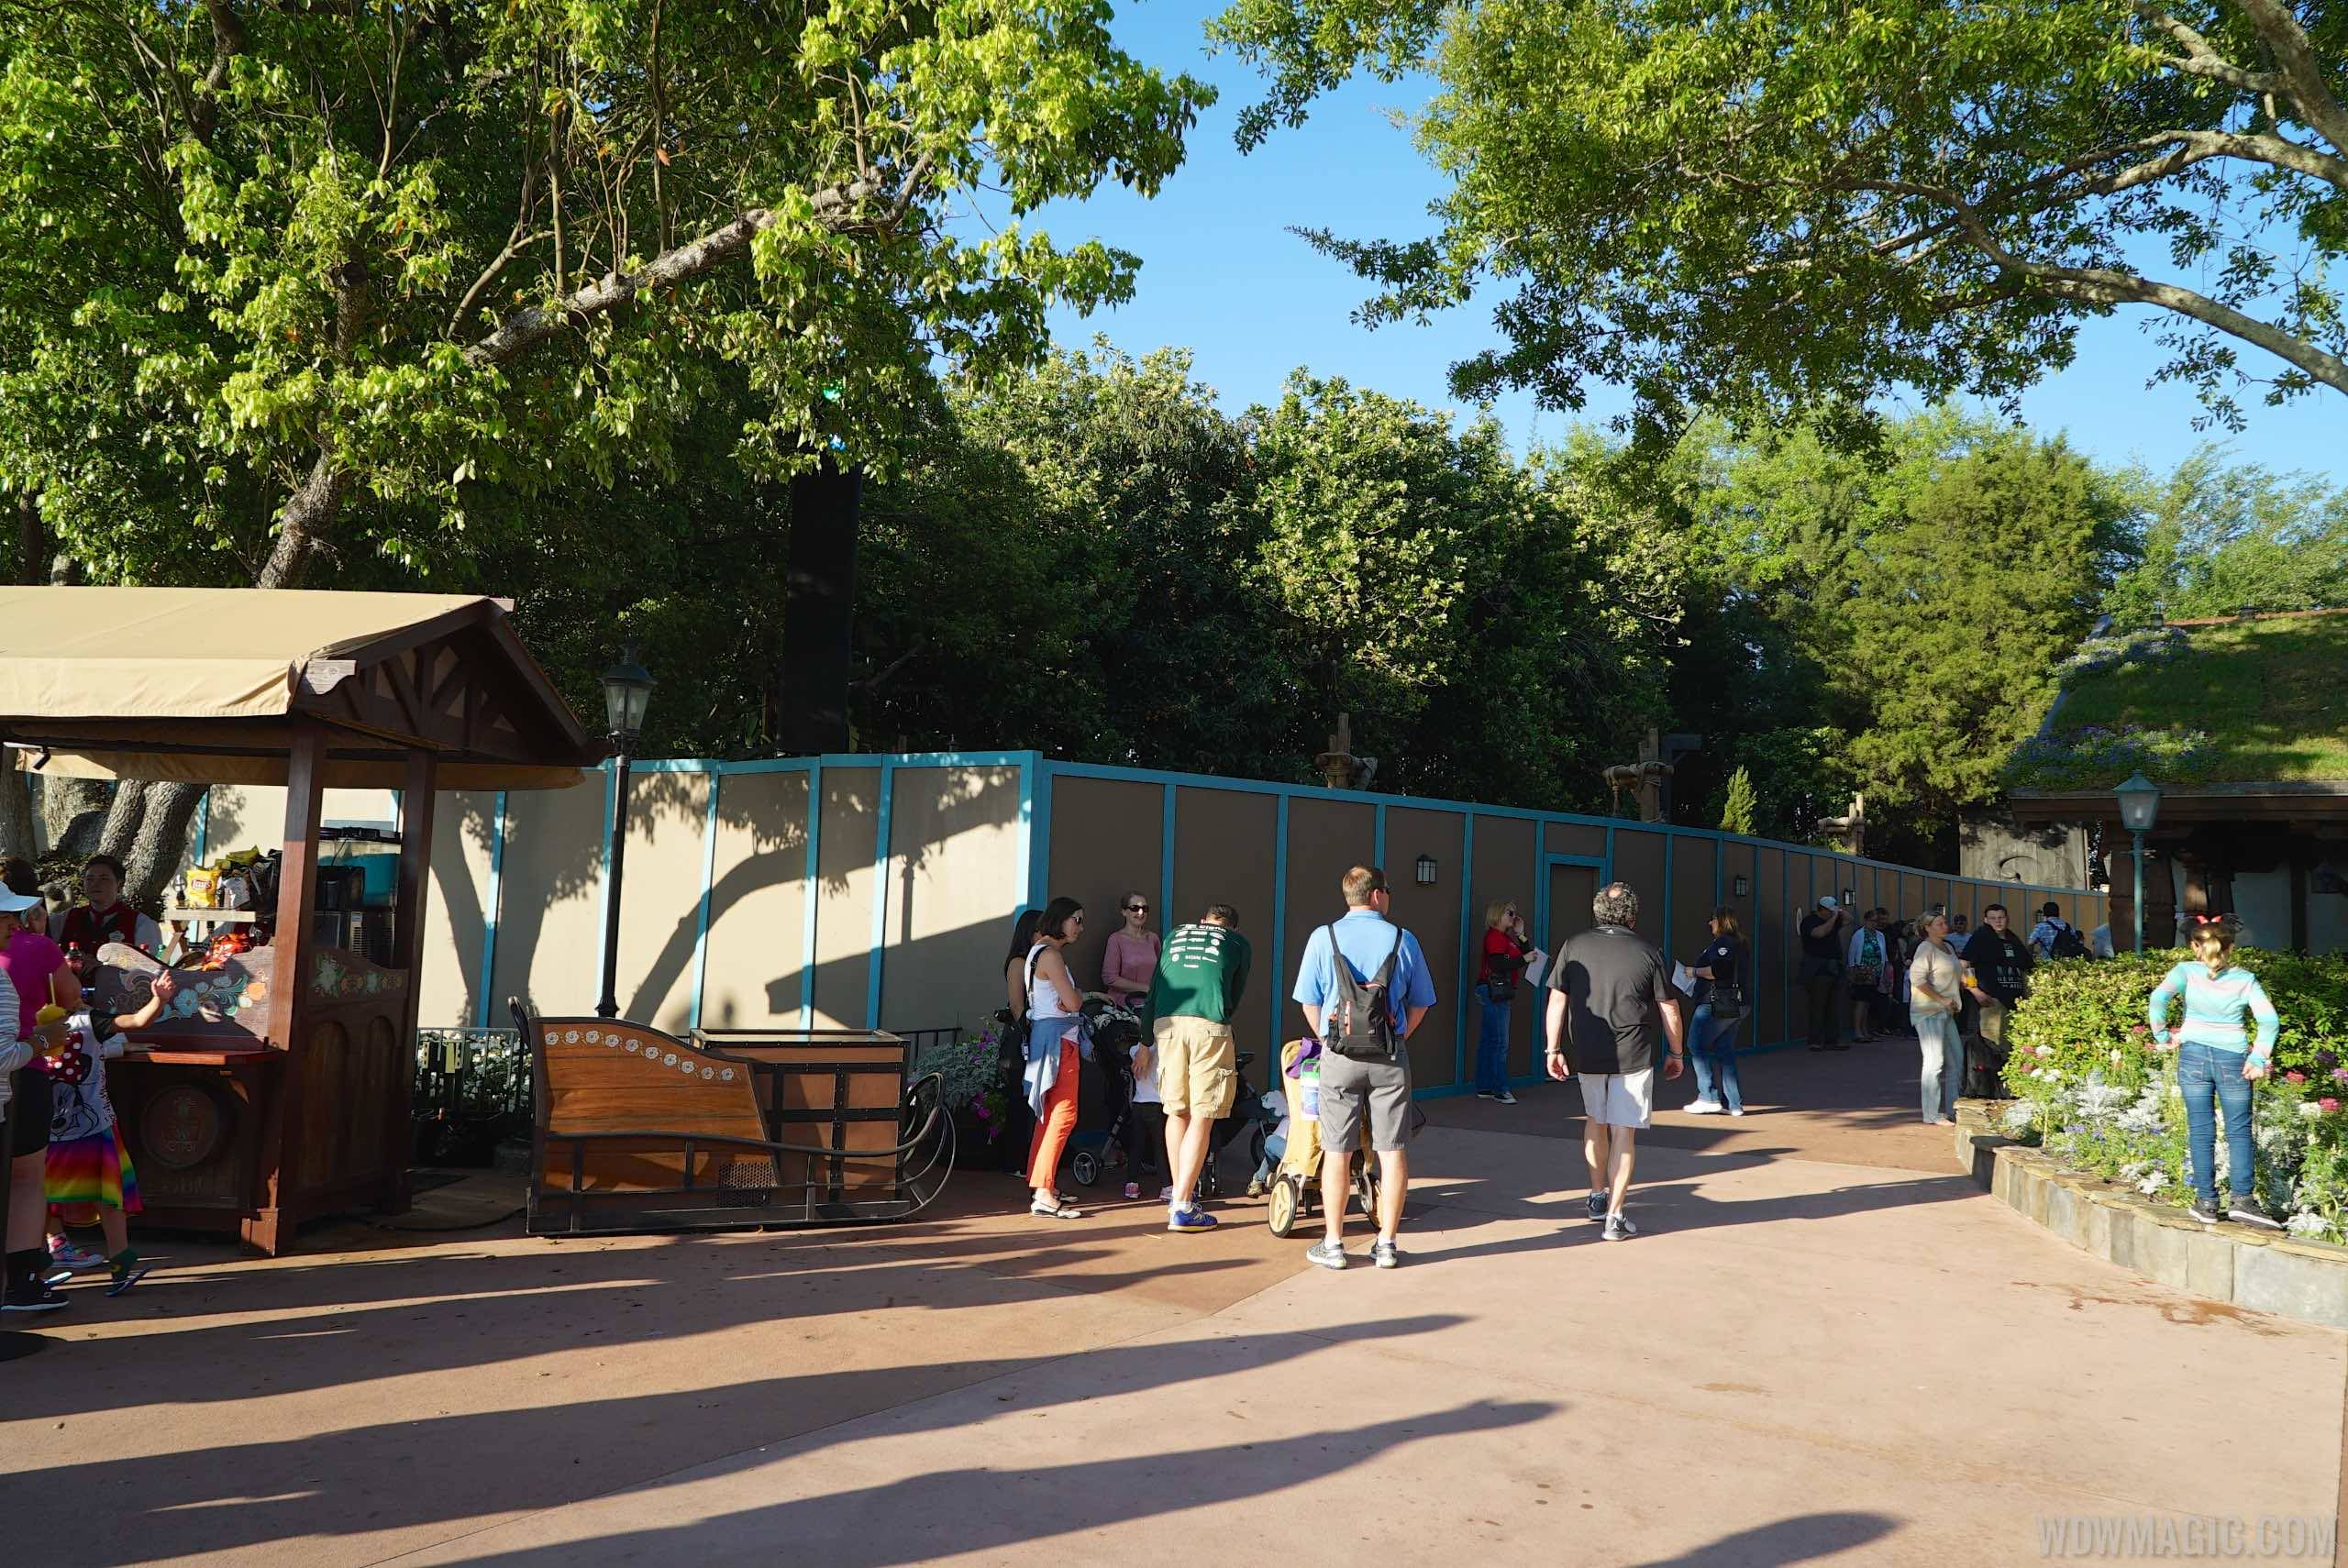 PHOTOS - Construction walls up between Epcot's Mexico and Norway as part of Frozen expansion